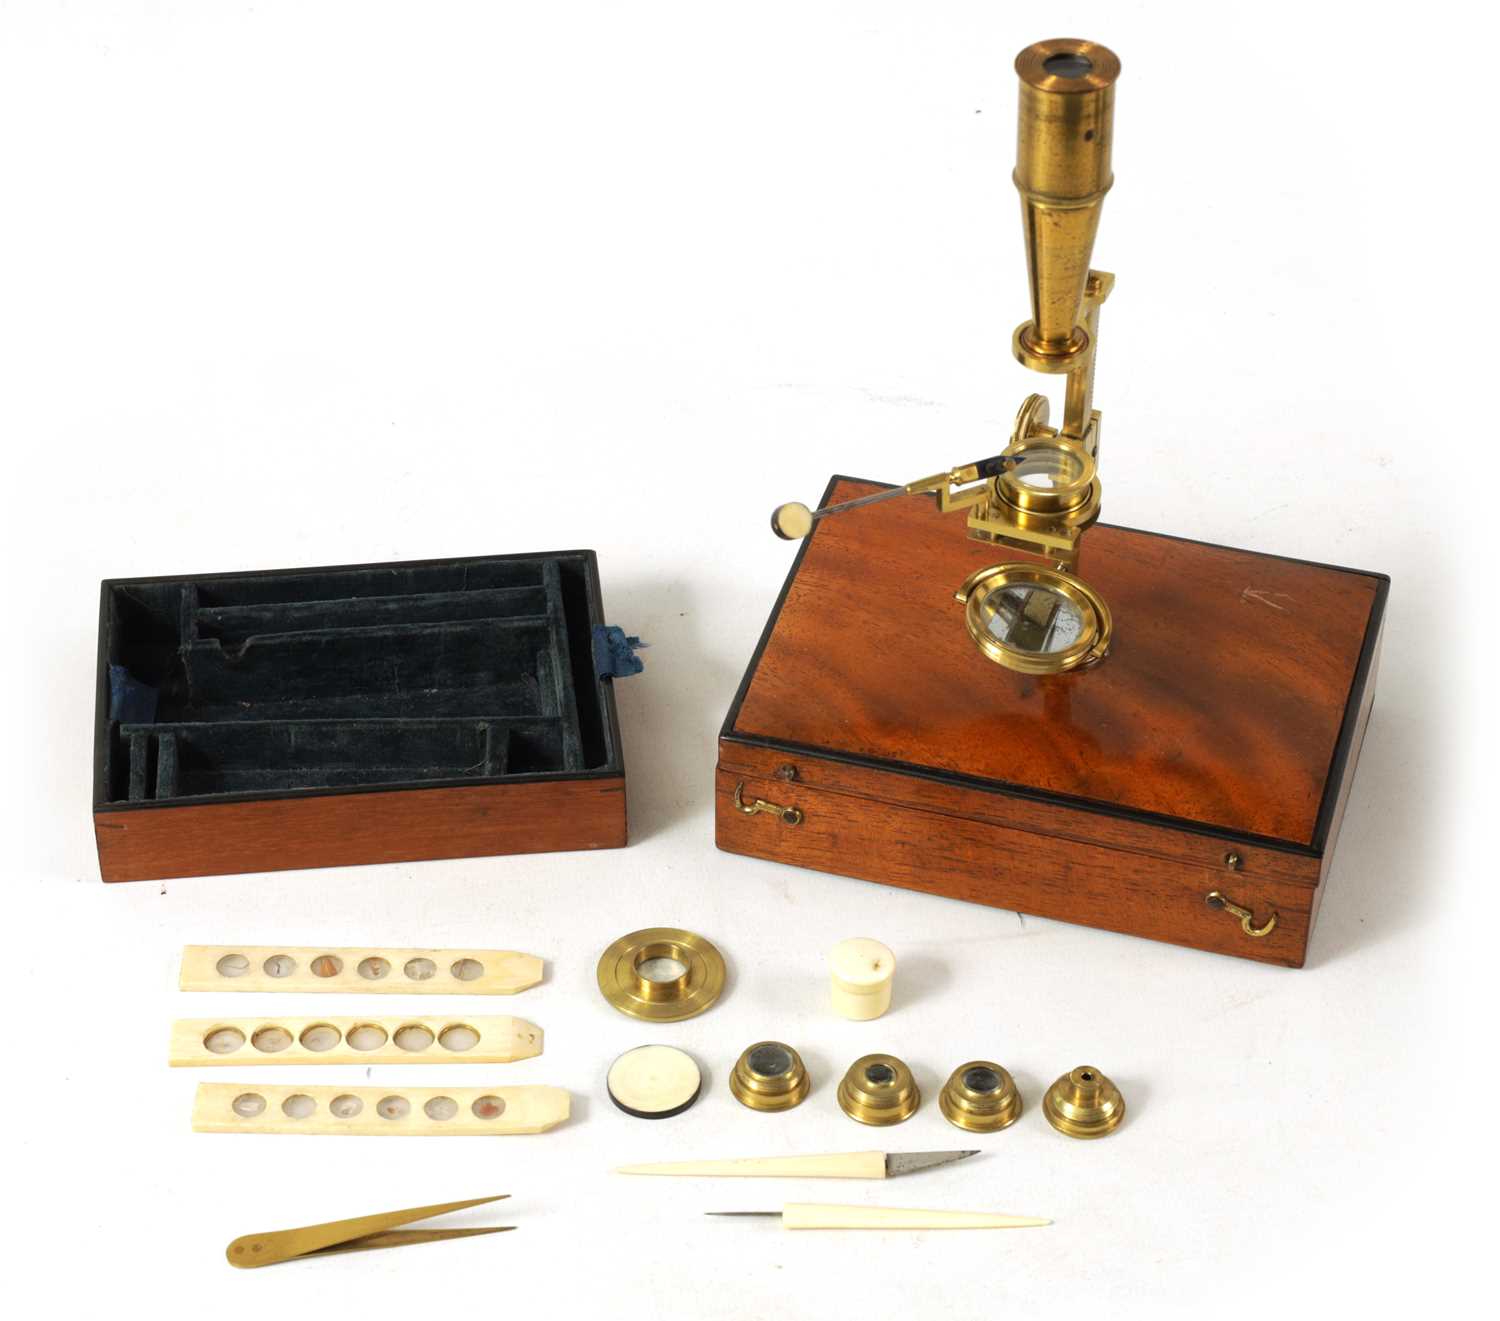 Lot 419 - WATKINS & HILL, CHARING CROSS, LONDON. AN EARLY 19TH CENTURY TRAVELLING MICROSCOPE